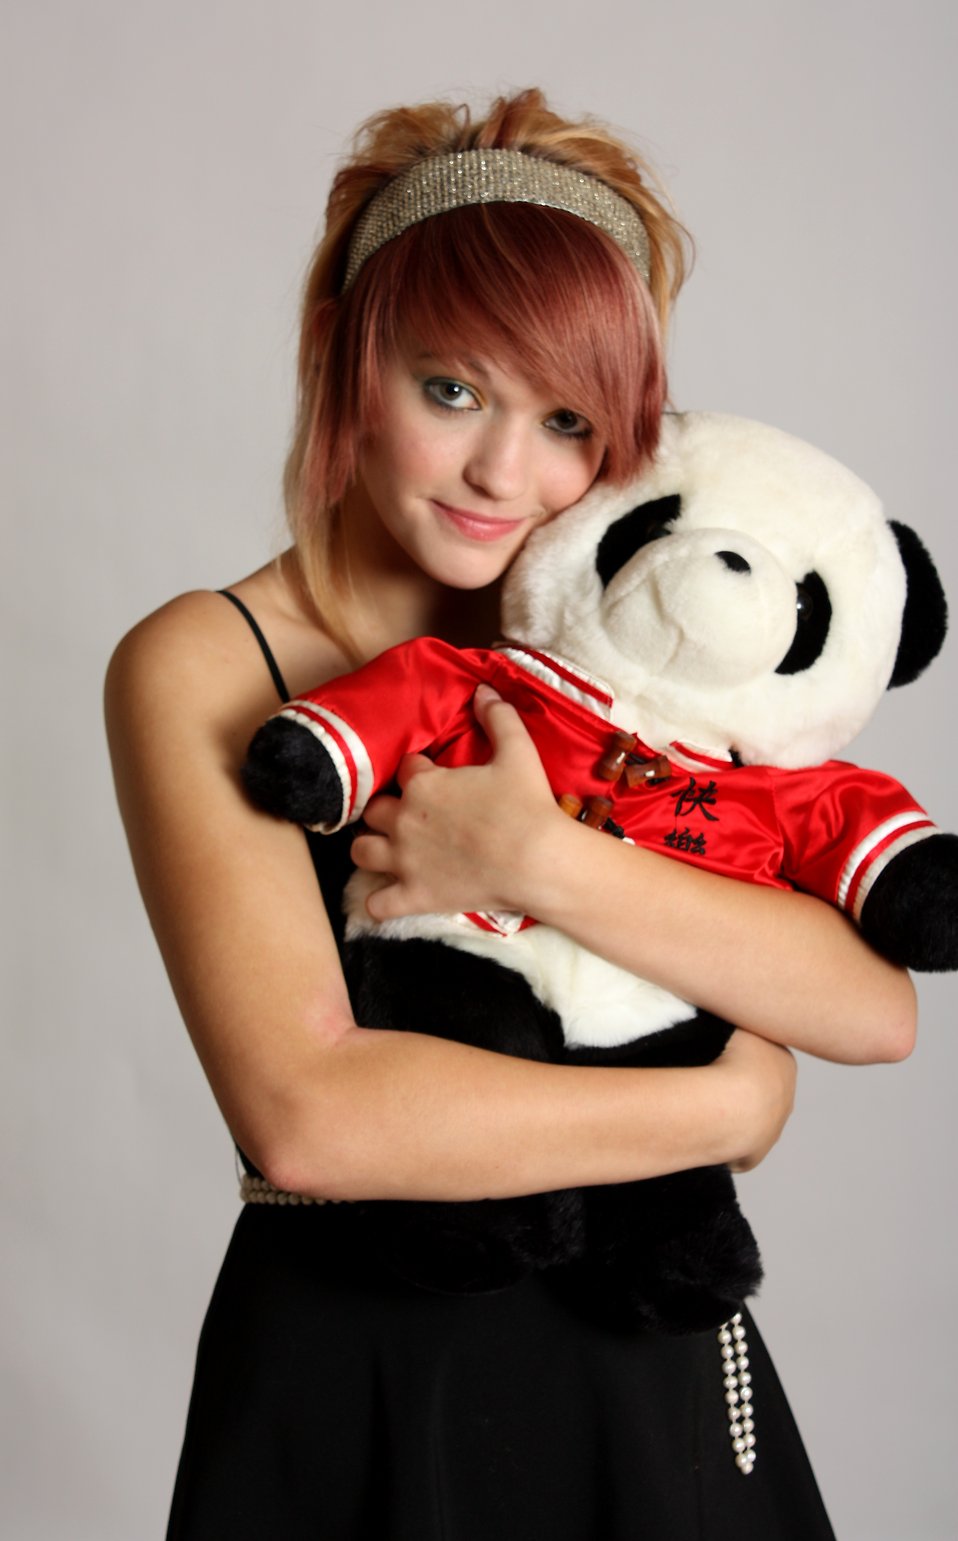 Cute Girls With Teddy Bear. A beautiful young girl holding